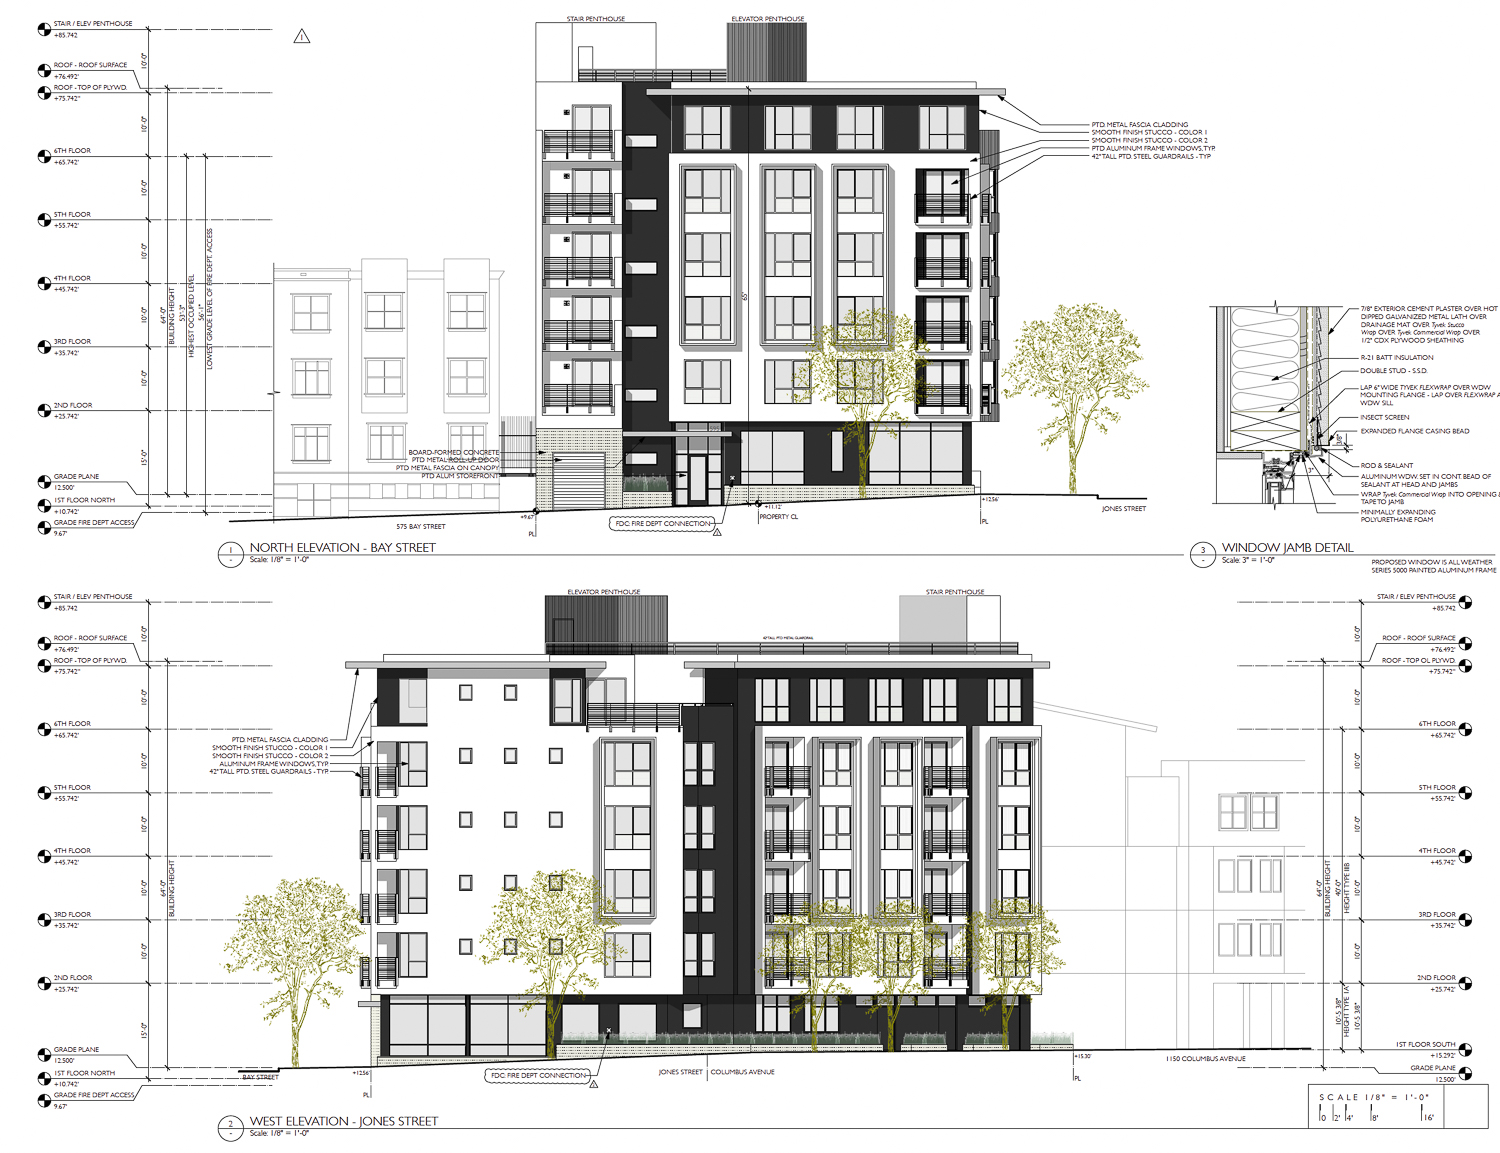 1196 Columbus Avenue facade elevations, illustration by Elevation Architects